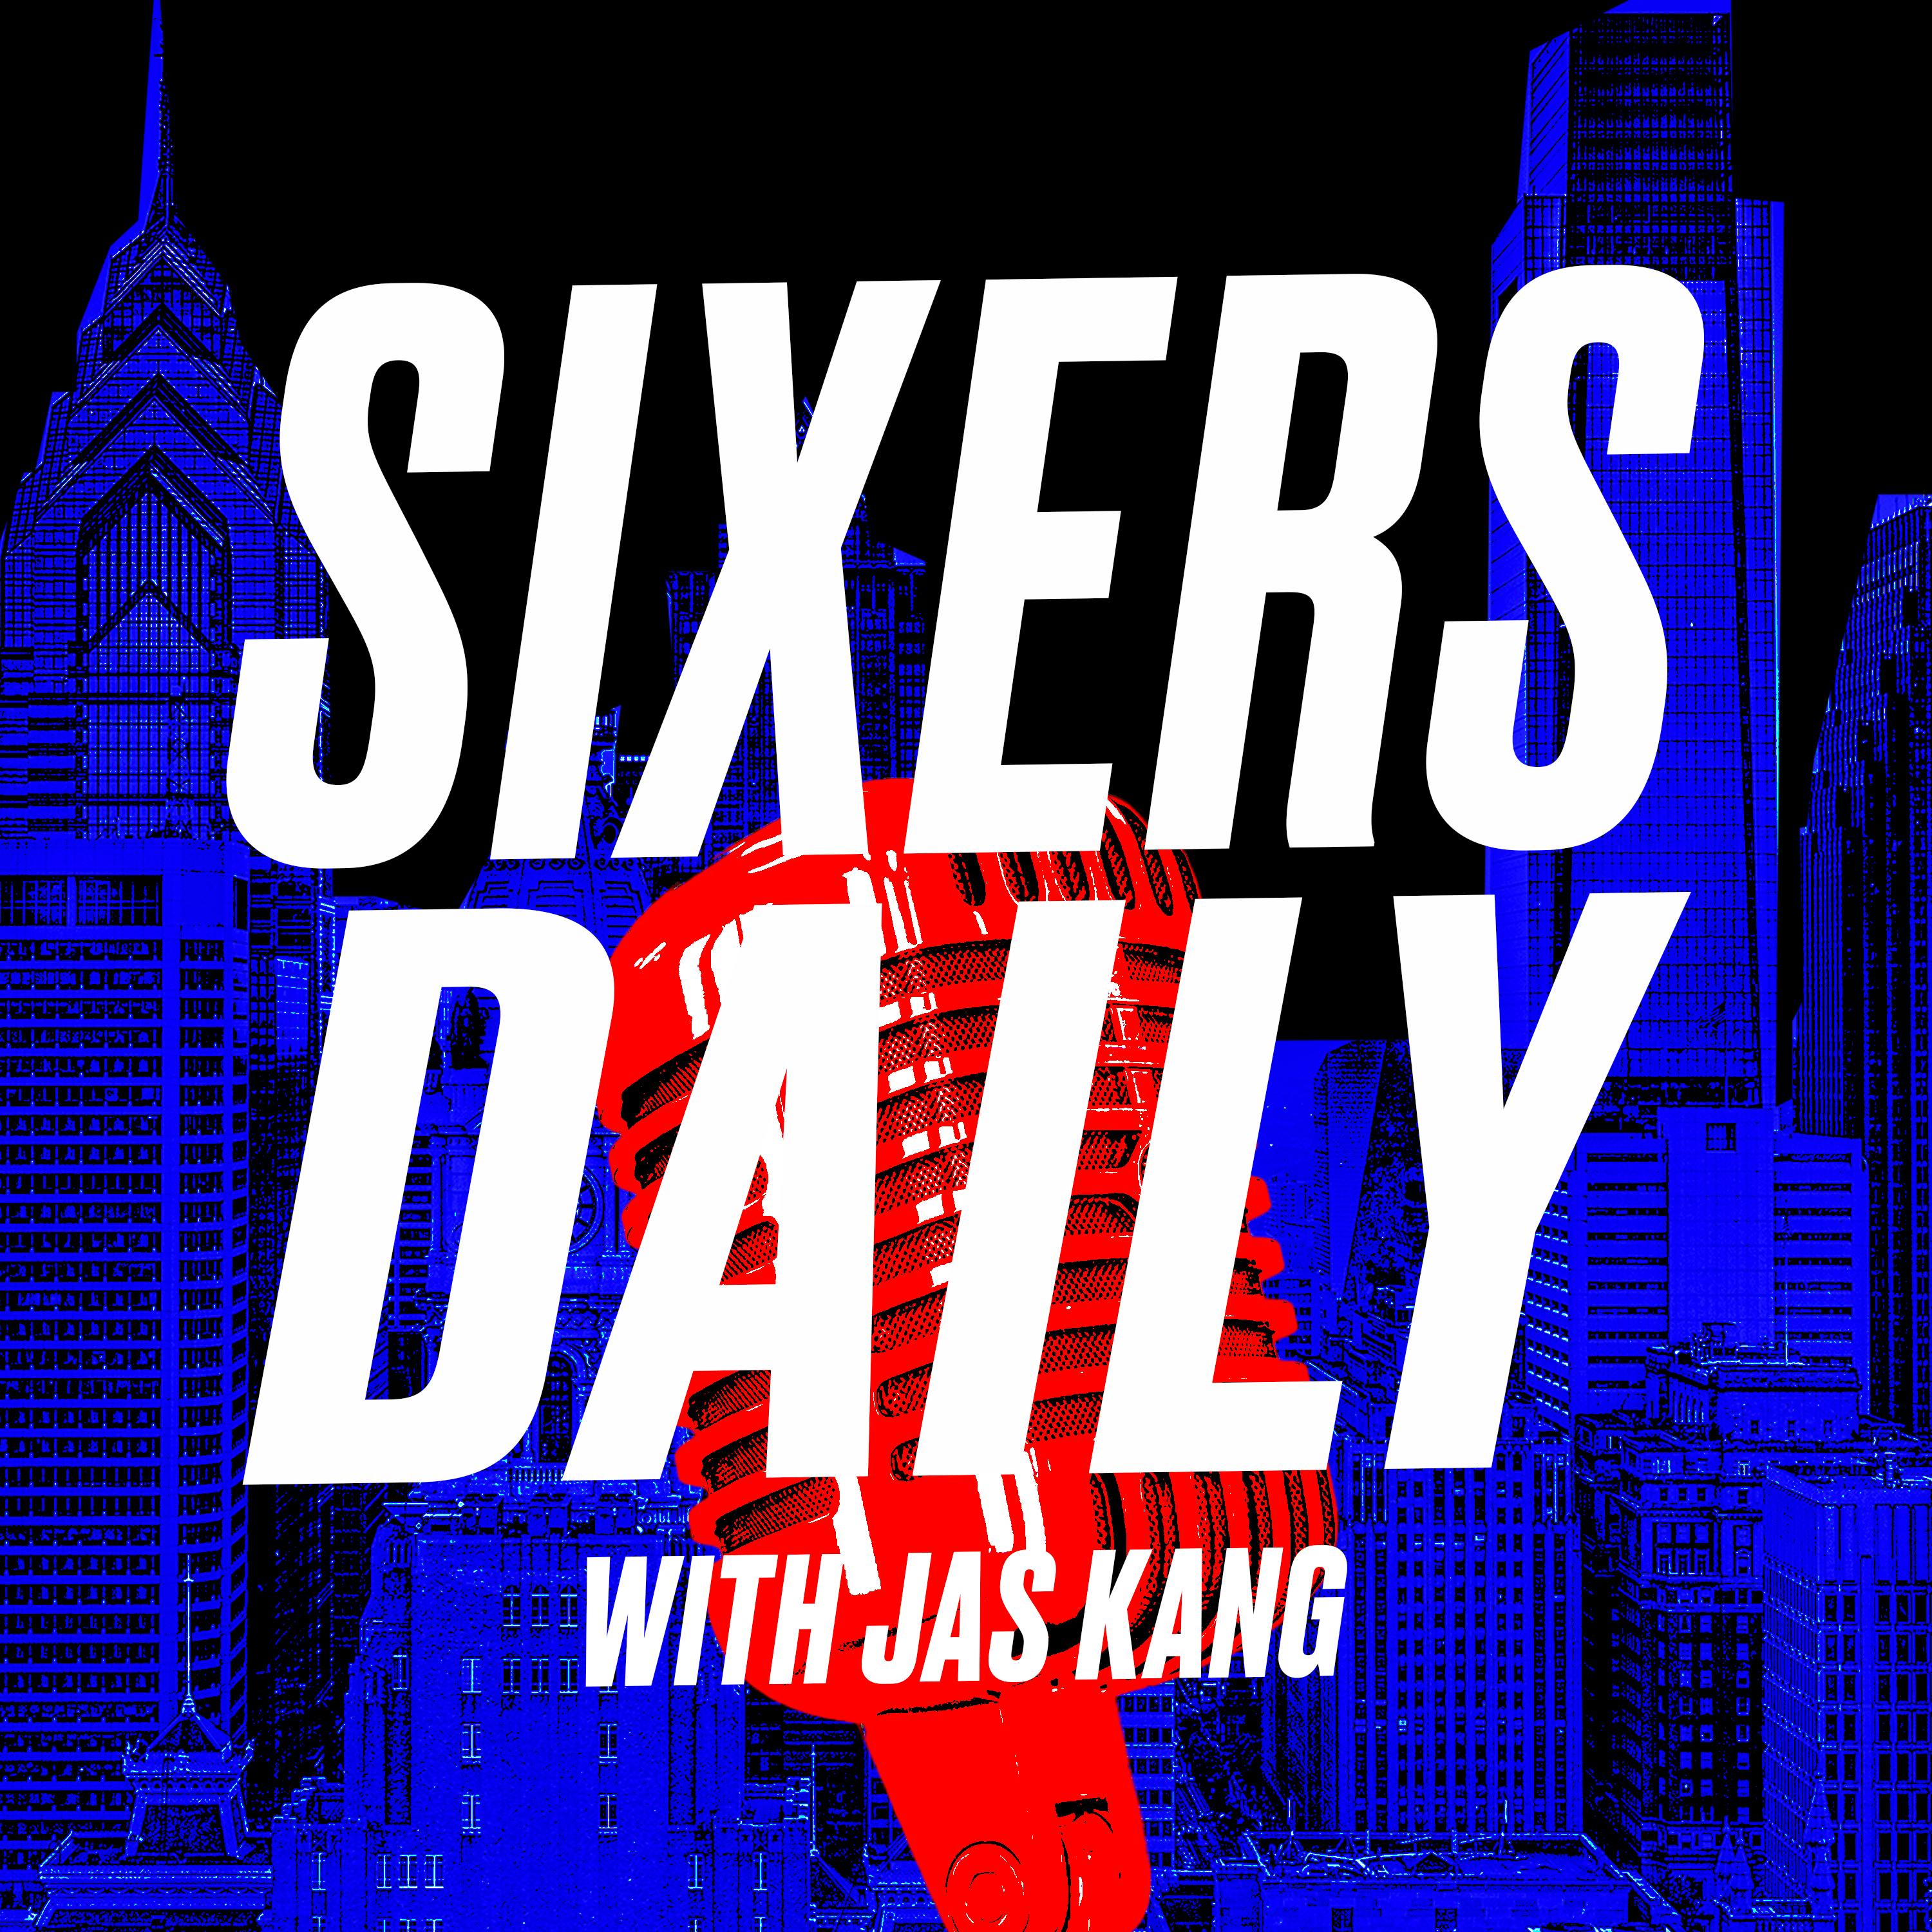 Sixers Daily with Jas Kang - Bleeding Green Nation's Brandon Lee Gowton on Joel Embiid's window in Philly, Doc Rivers sticking around, plus some Eagles talk after a busy offseason